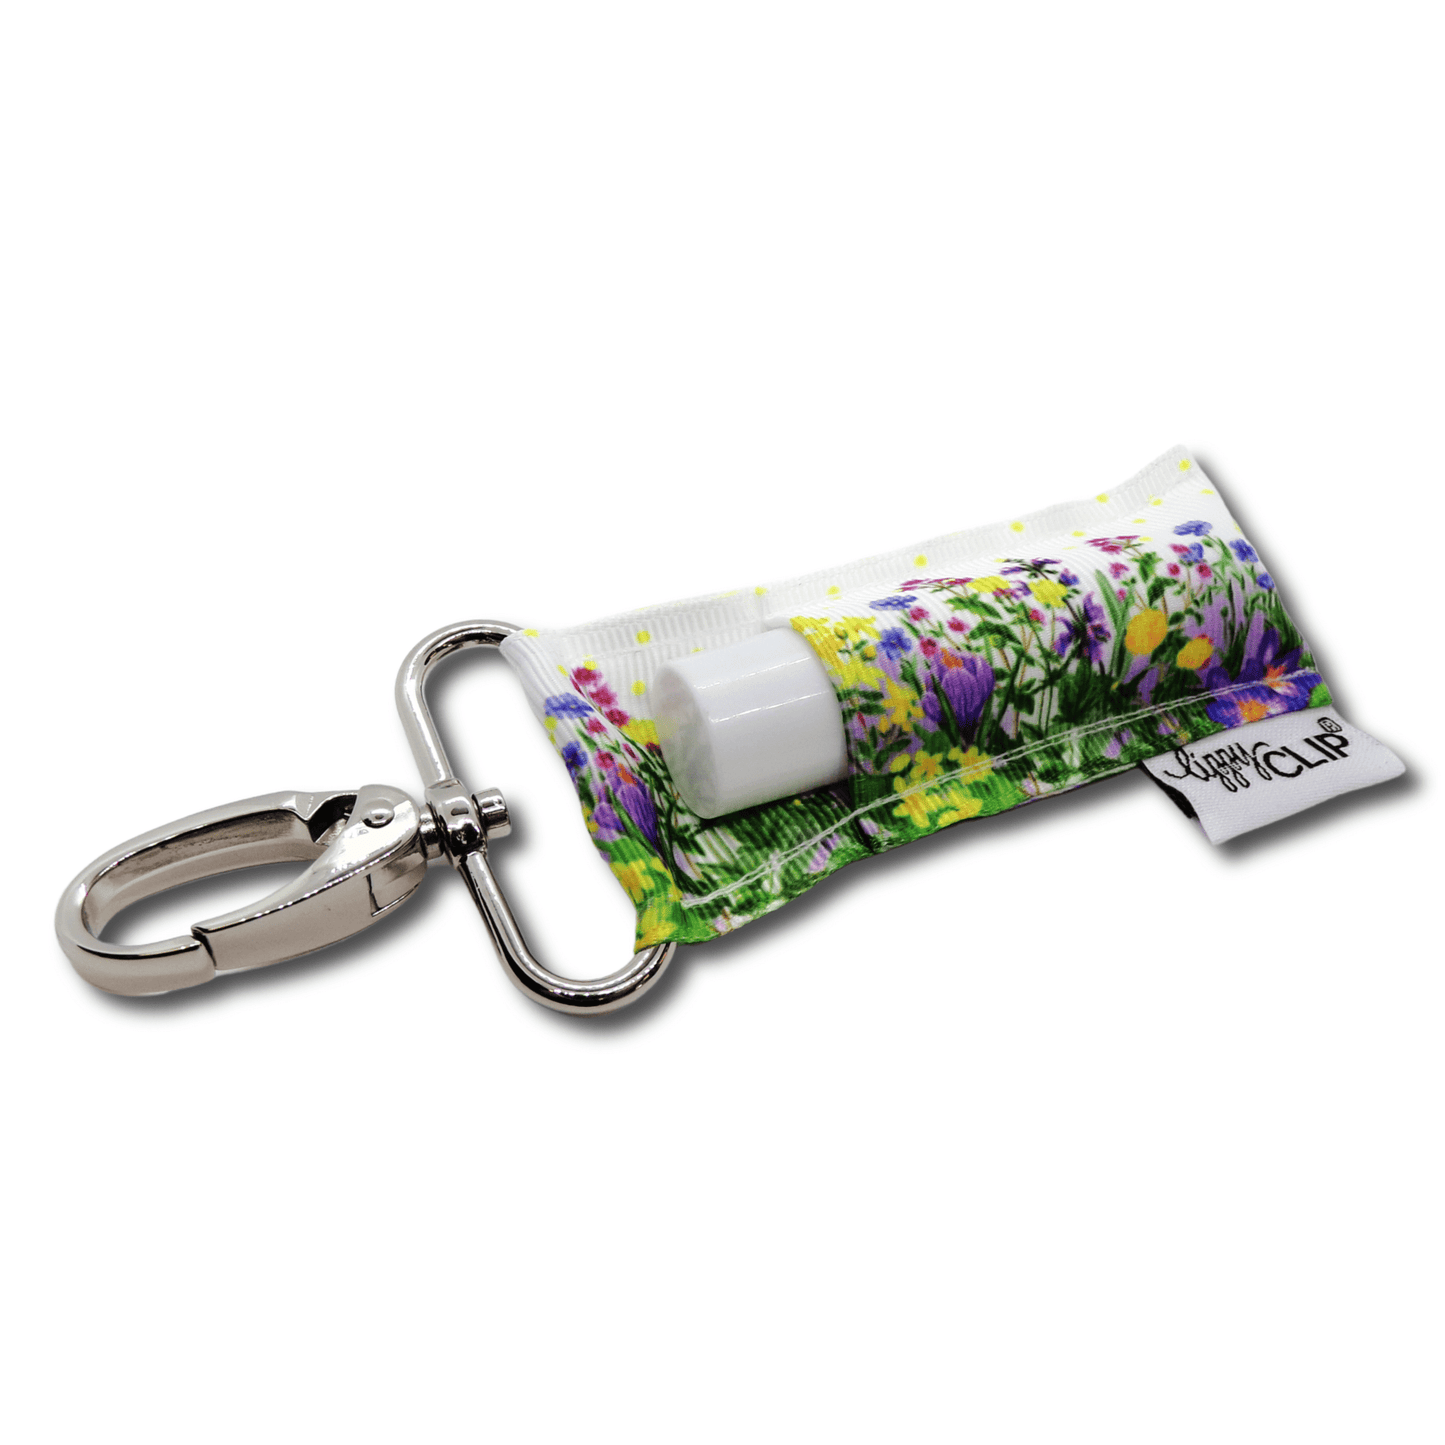 Wildflower Field LippyClip Lip Balm Holder for Chapstick, Purse Accessory, Cash Wrap Item, Mothers Day Gift